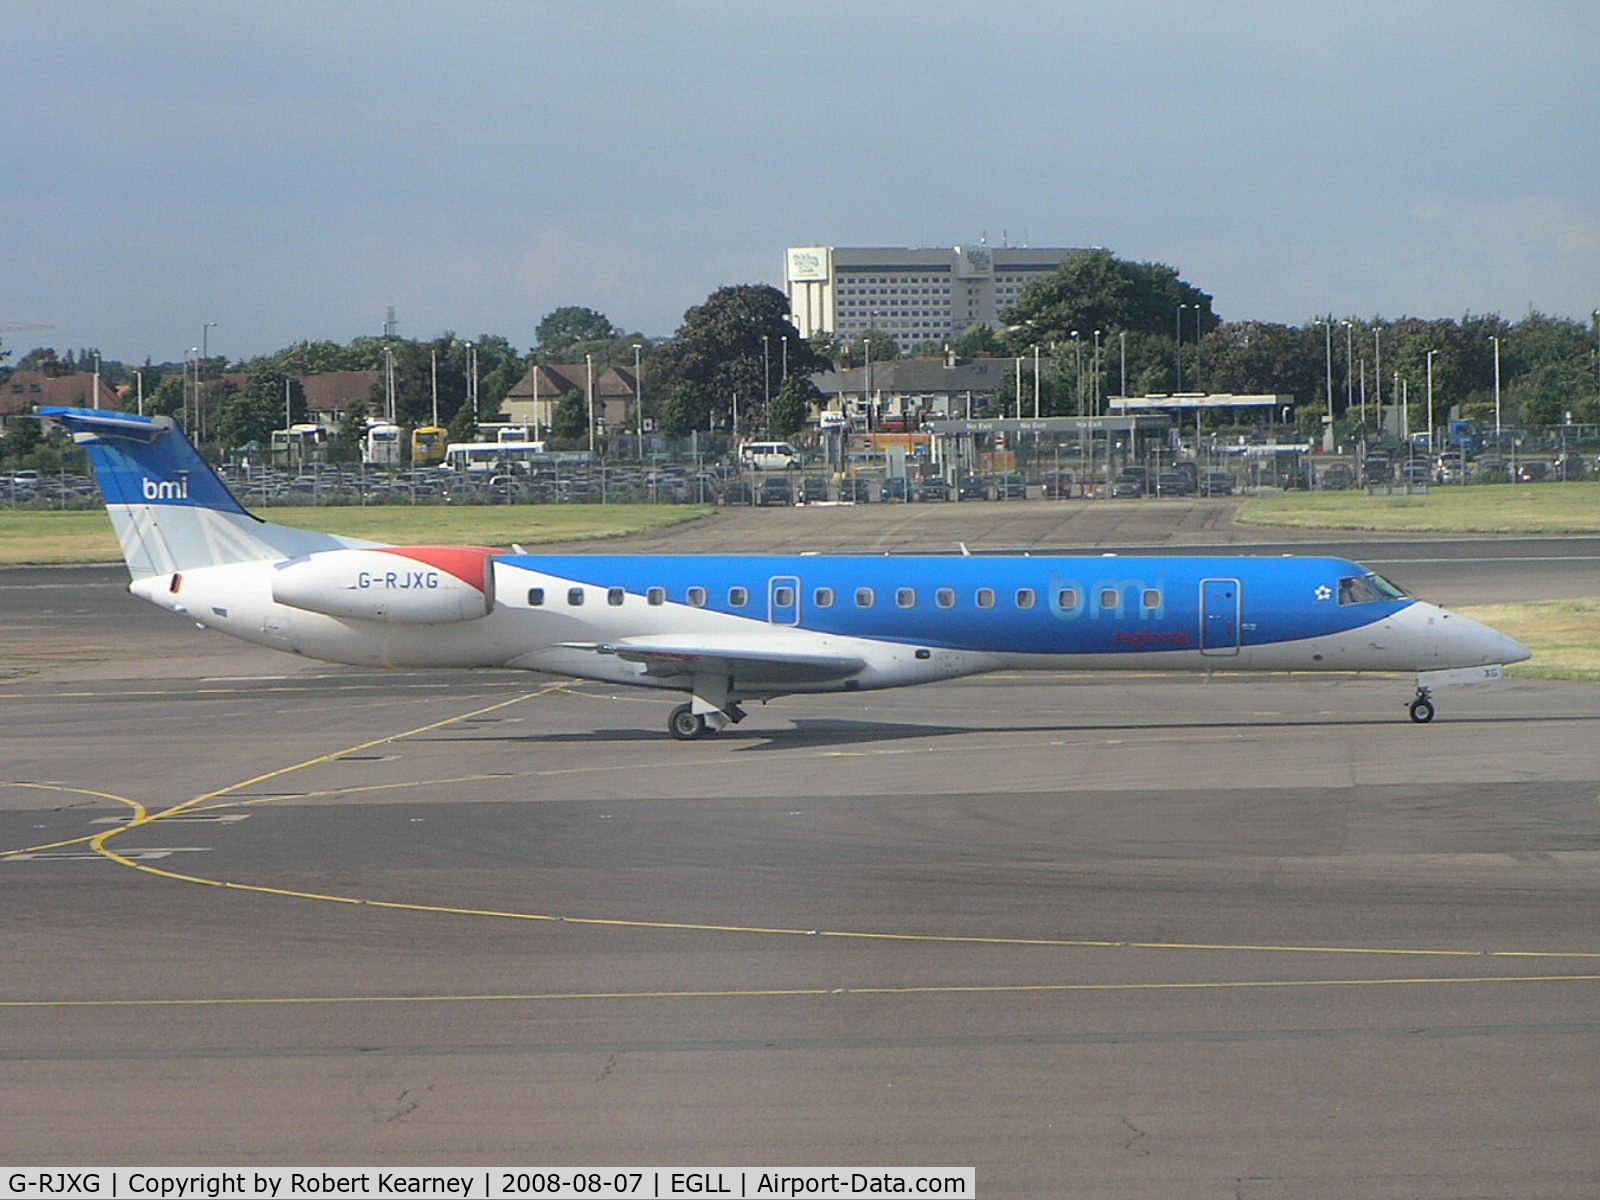 G-RJXG, 2001 Embraer EMB-145EP (ERJ-145EP) C/N 145390, BMI going to stand